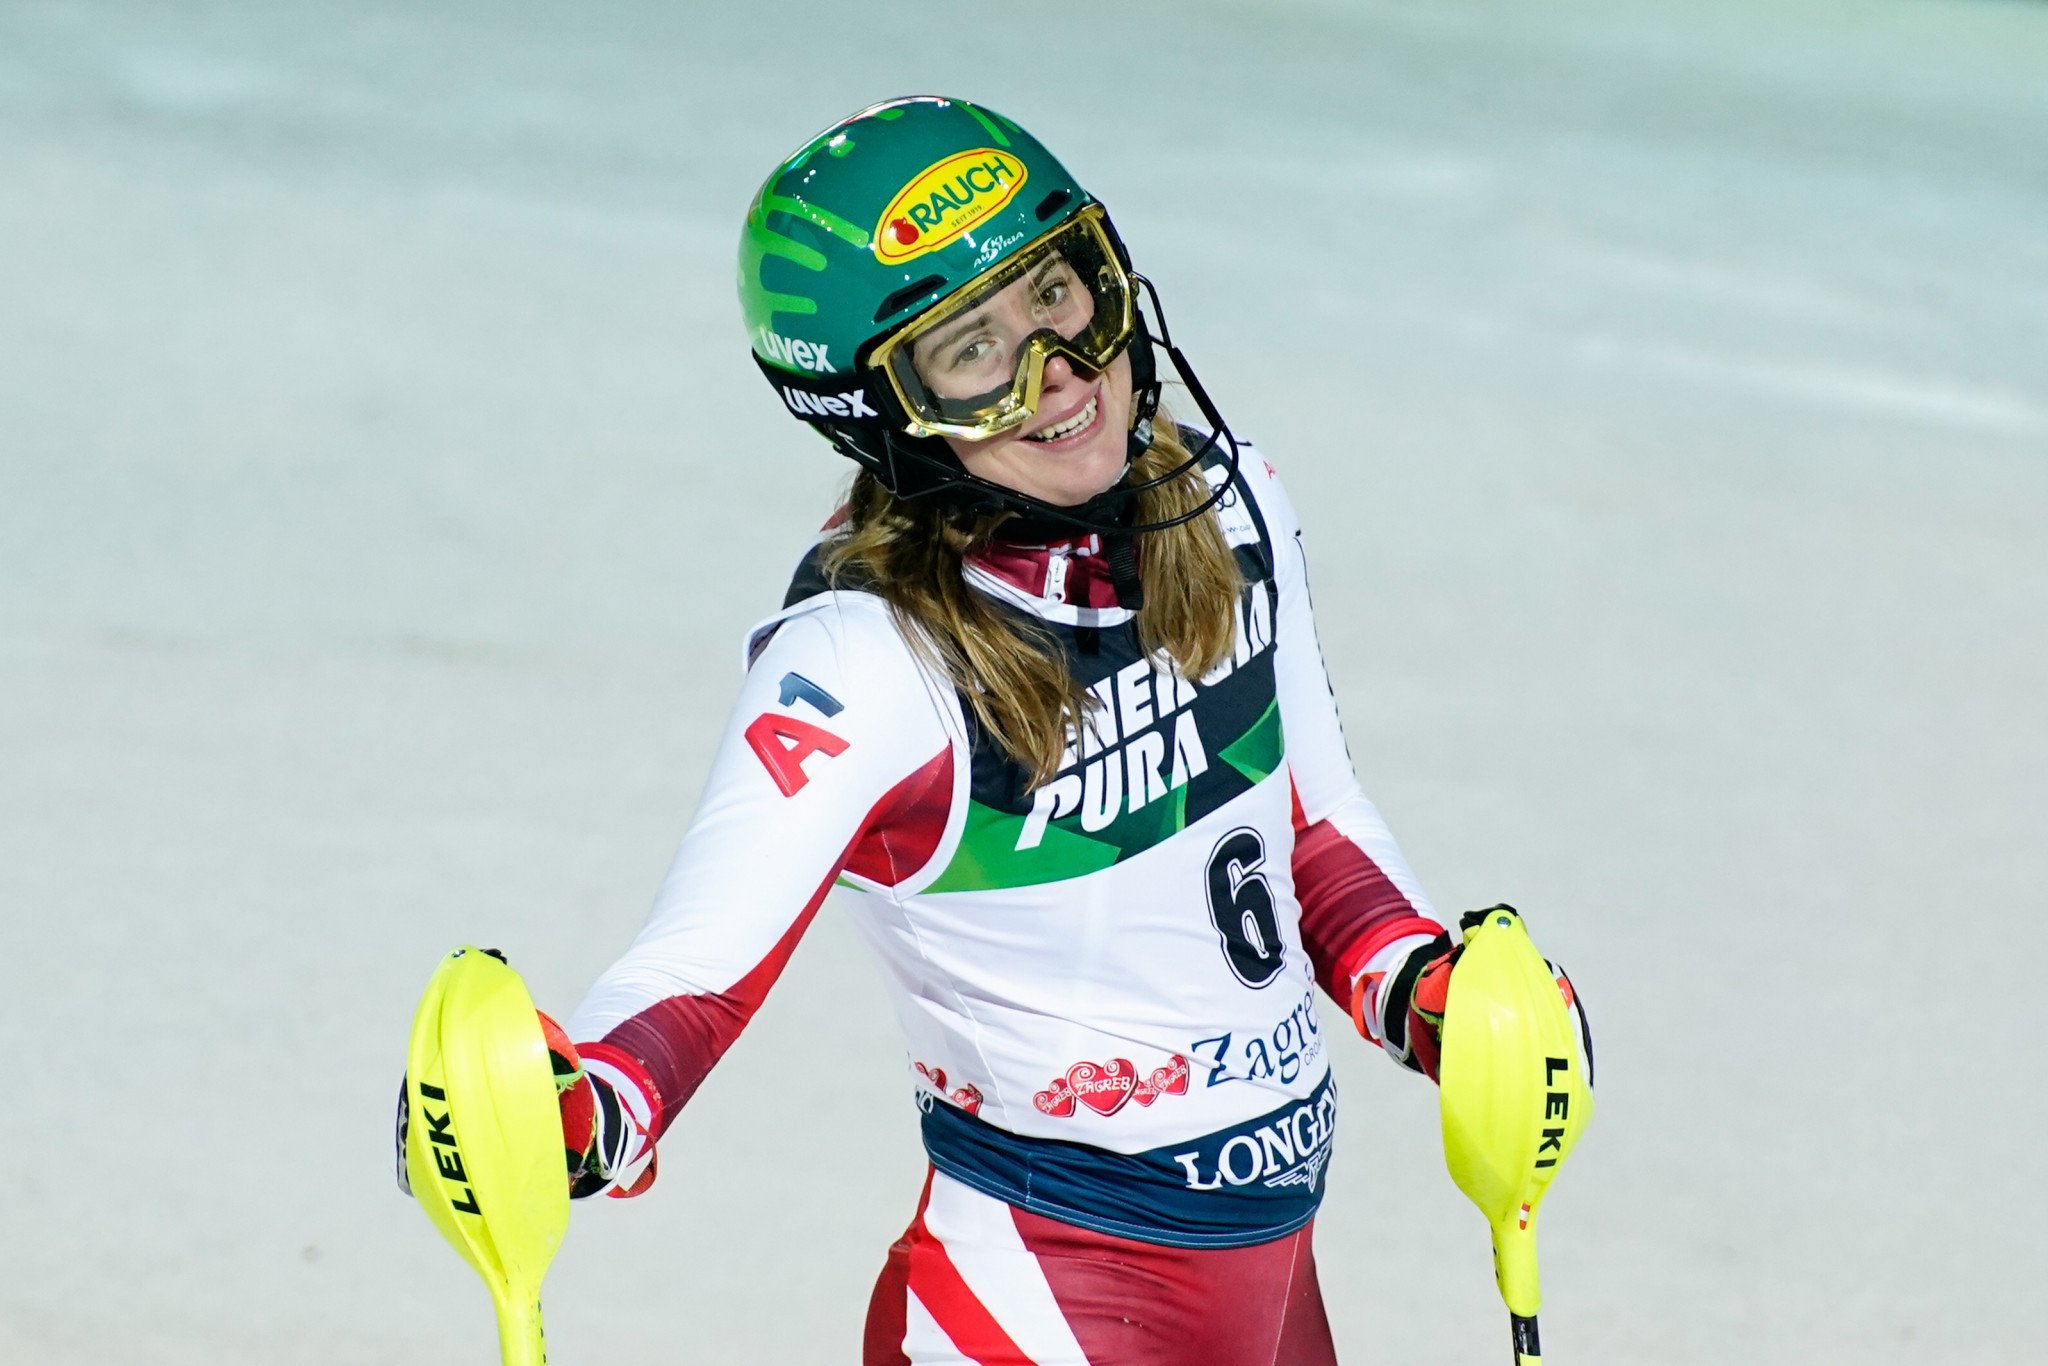 Katharina Liensberger is still searching for her first World Cup win in a consistent slalom season so far ©Getty Images